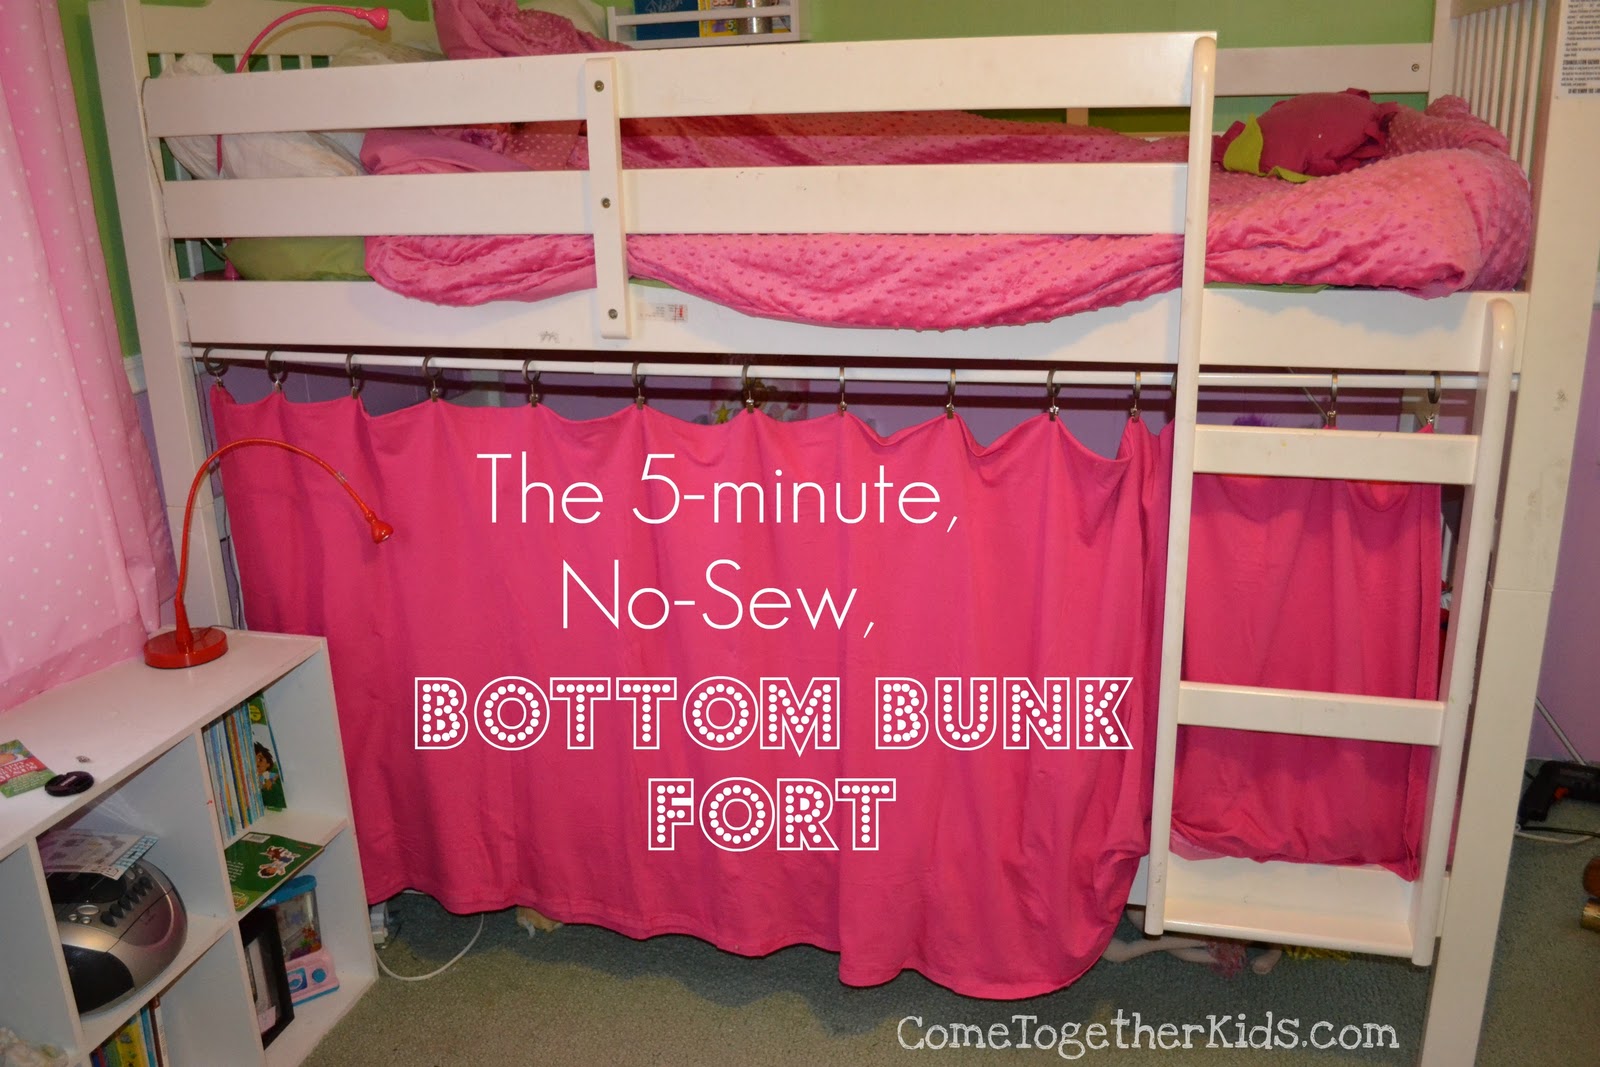 No Sew Bottom Bunk Fort, How To Make Bunk Bed Curtains